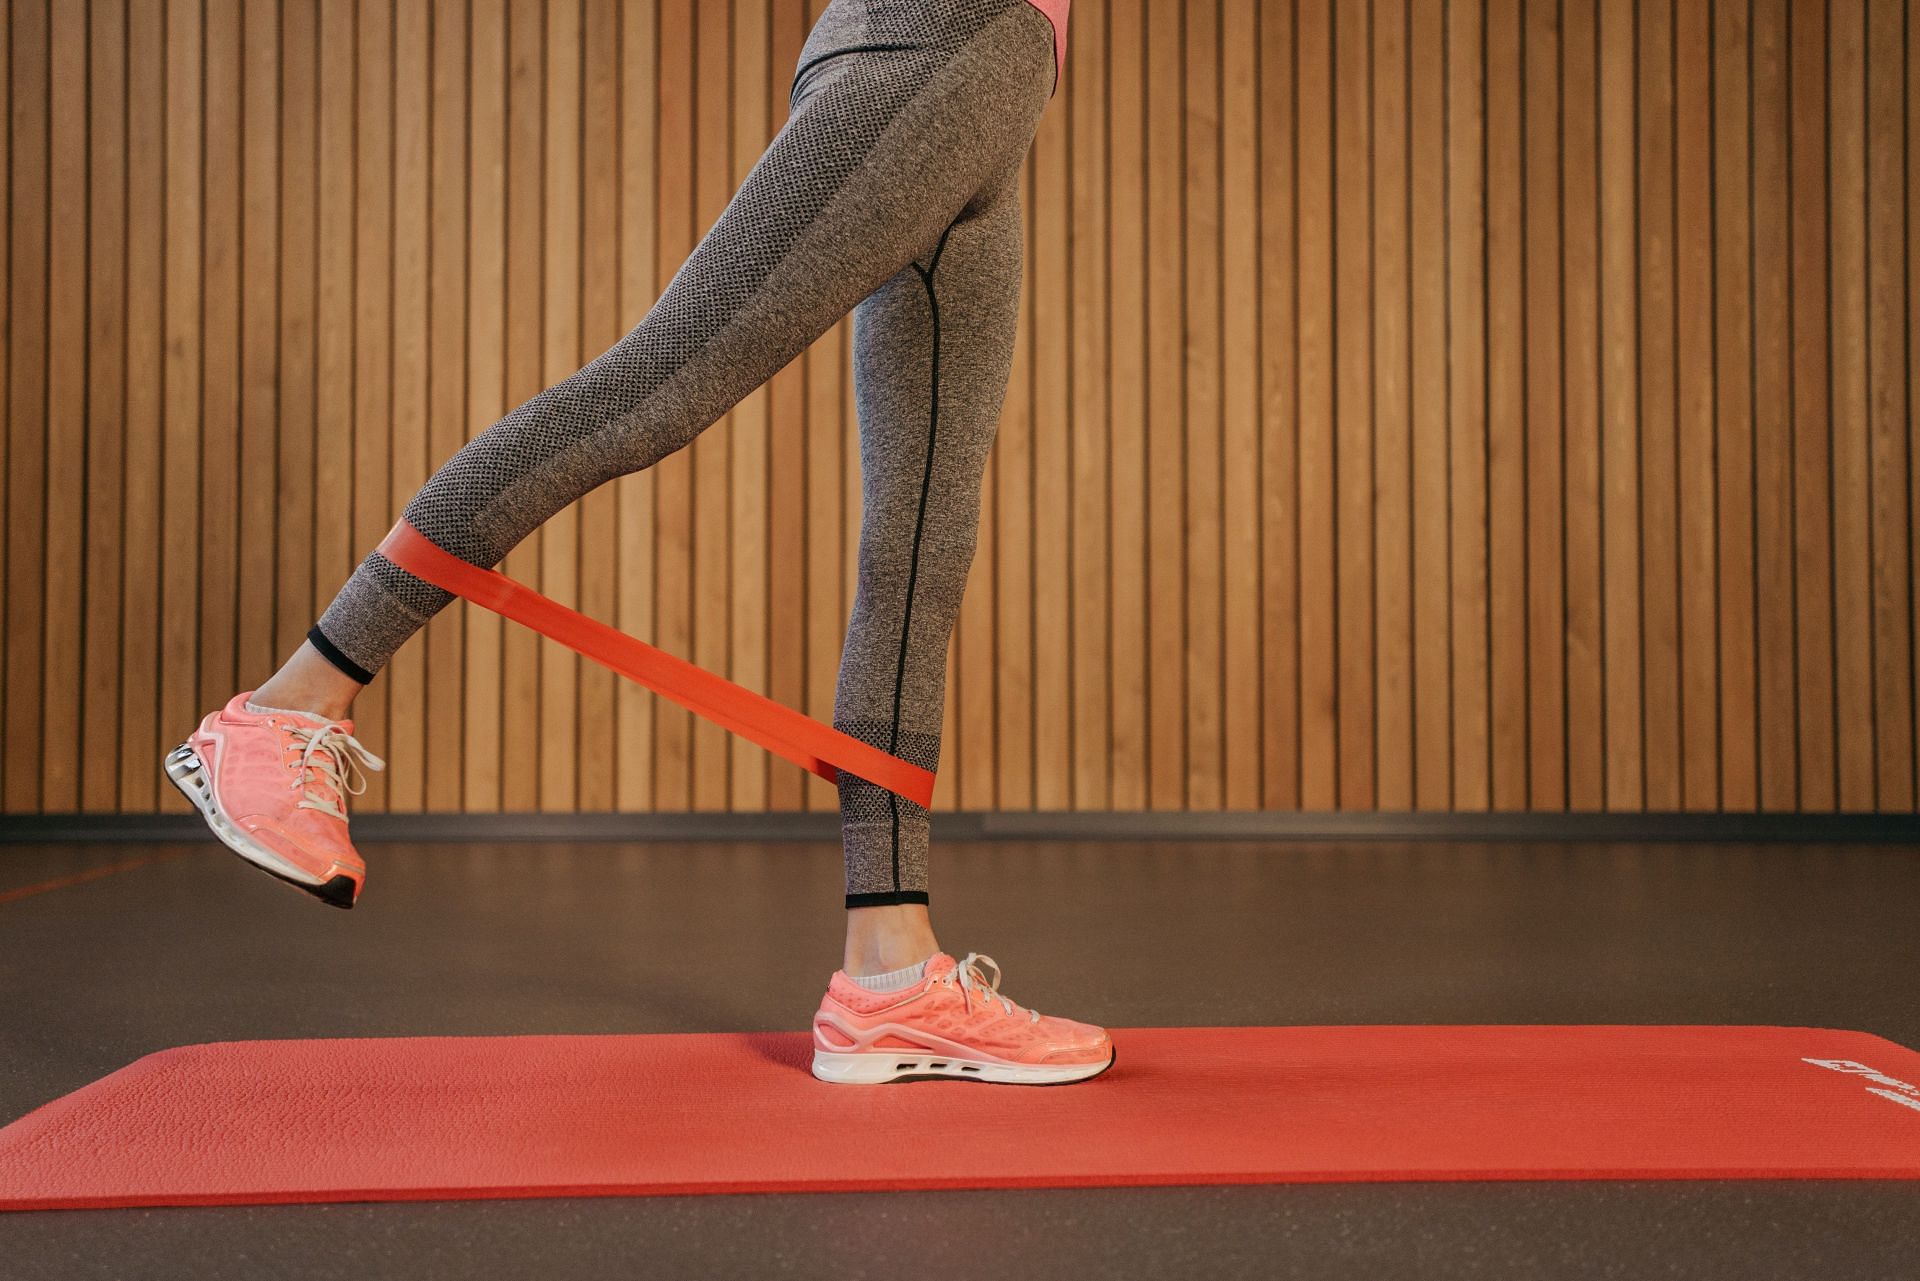 Perfect for resistance training. (Image by Pavel Danilyuk / Pexels)